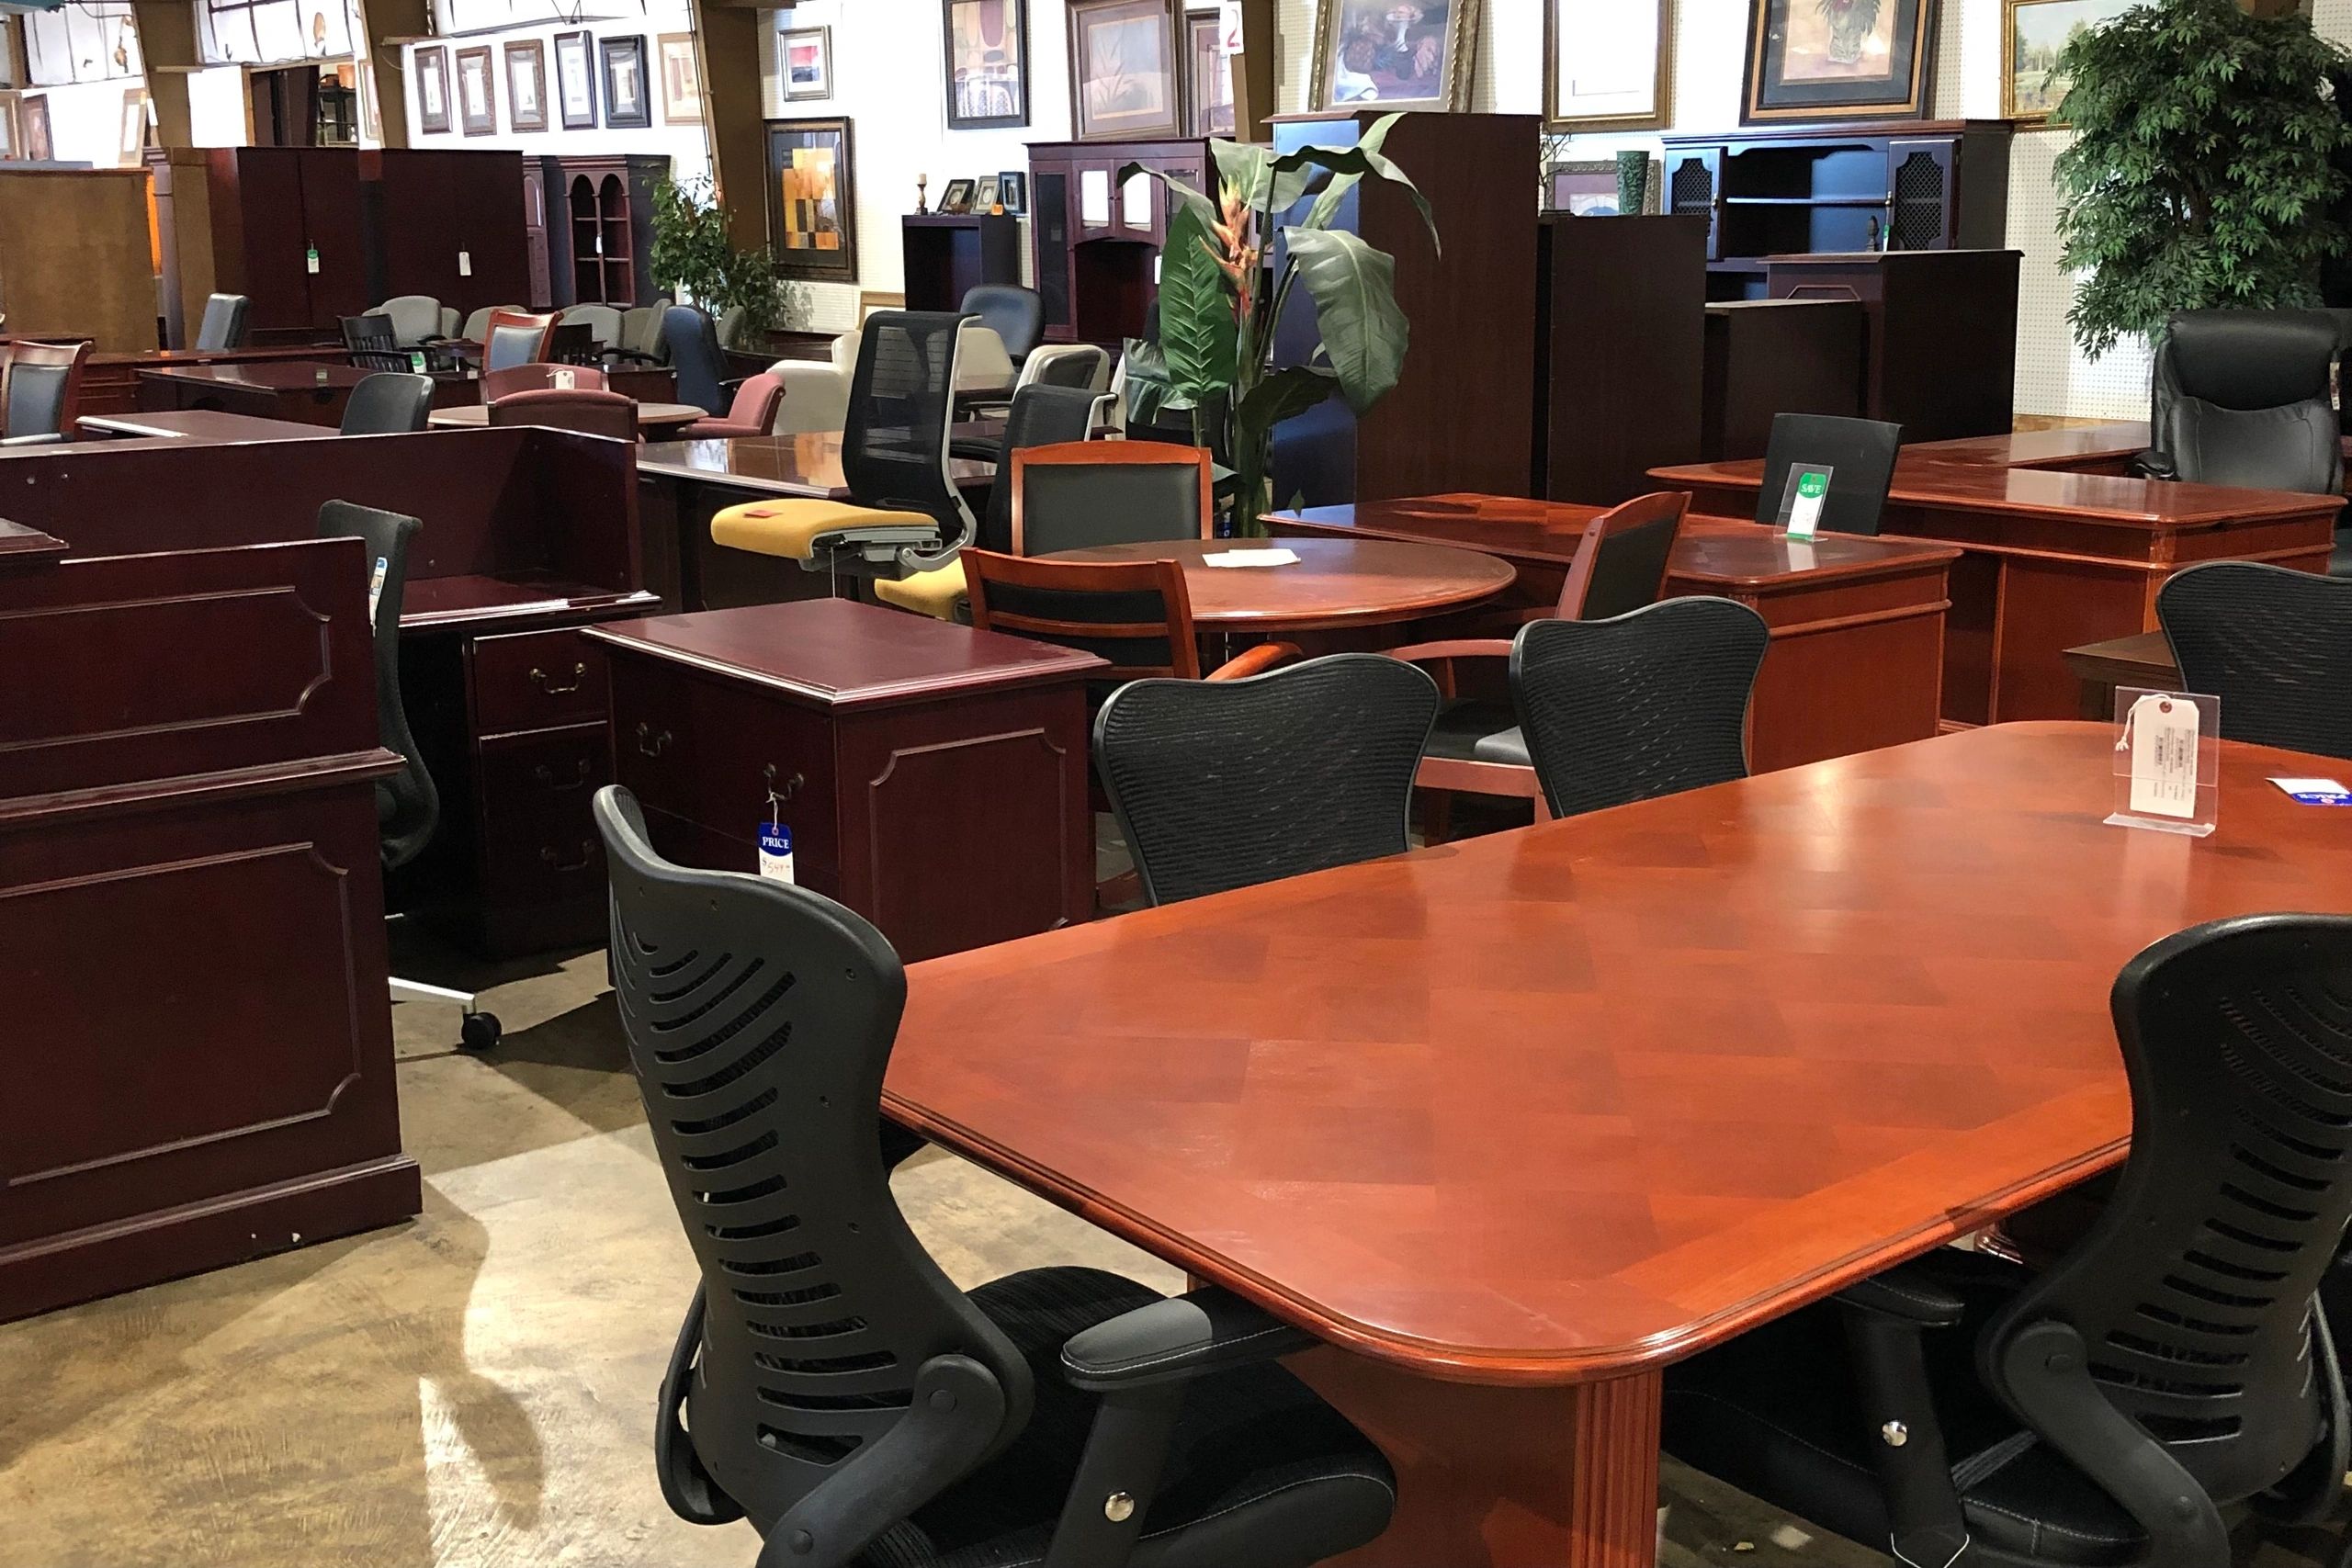 office furniture outlet
office furniture for sale
discount furniture
office furniture store
chairs